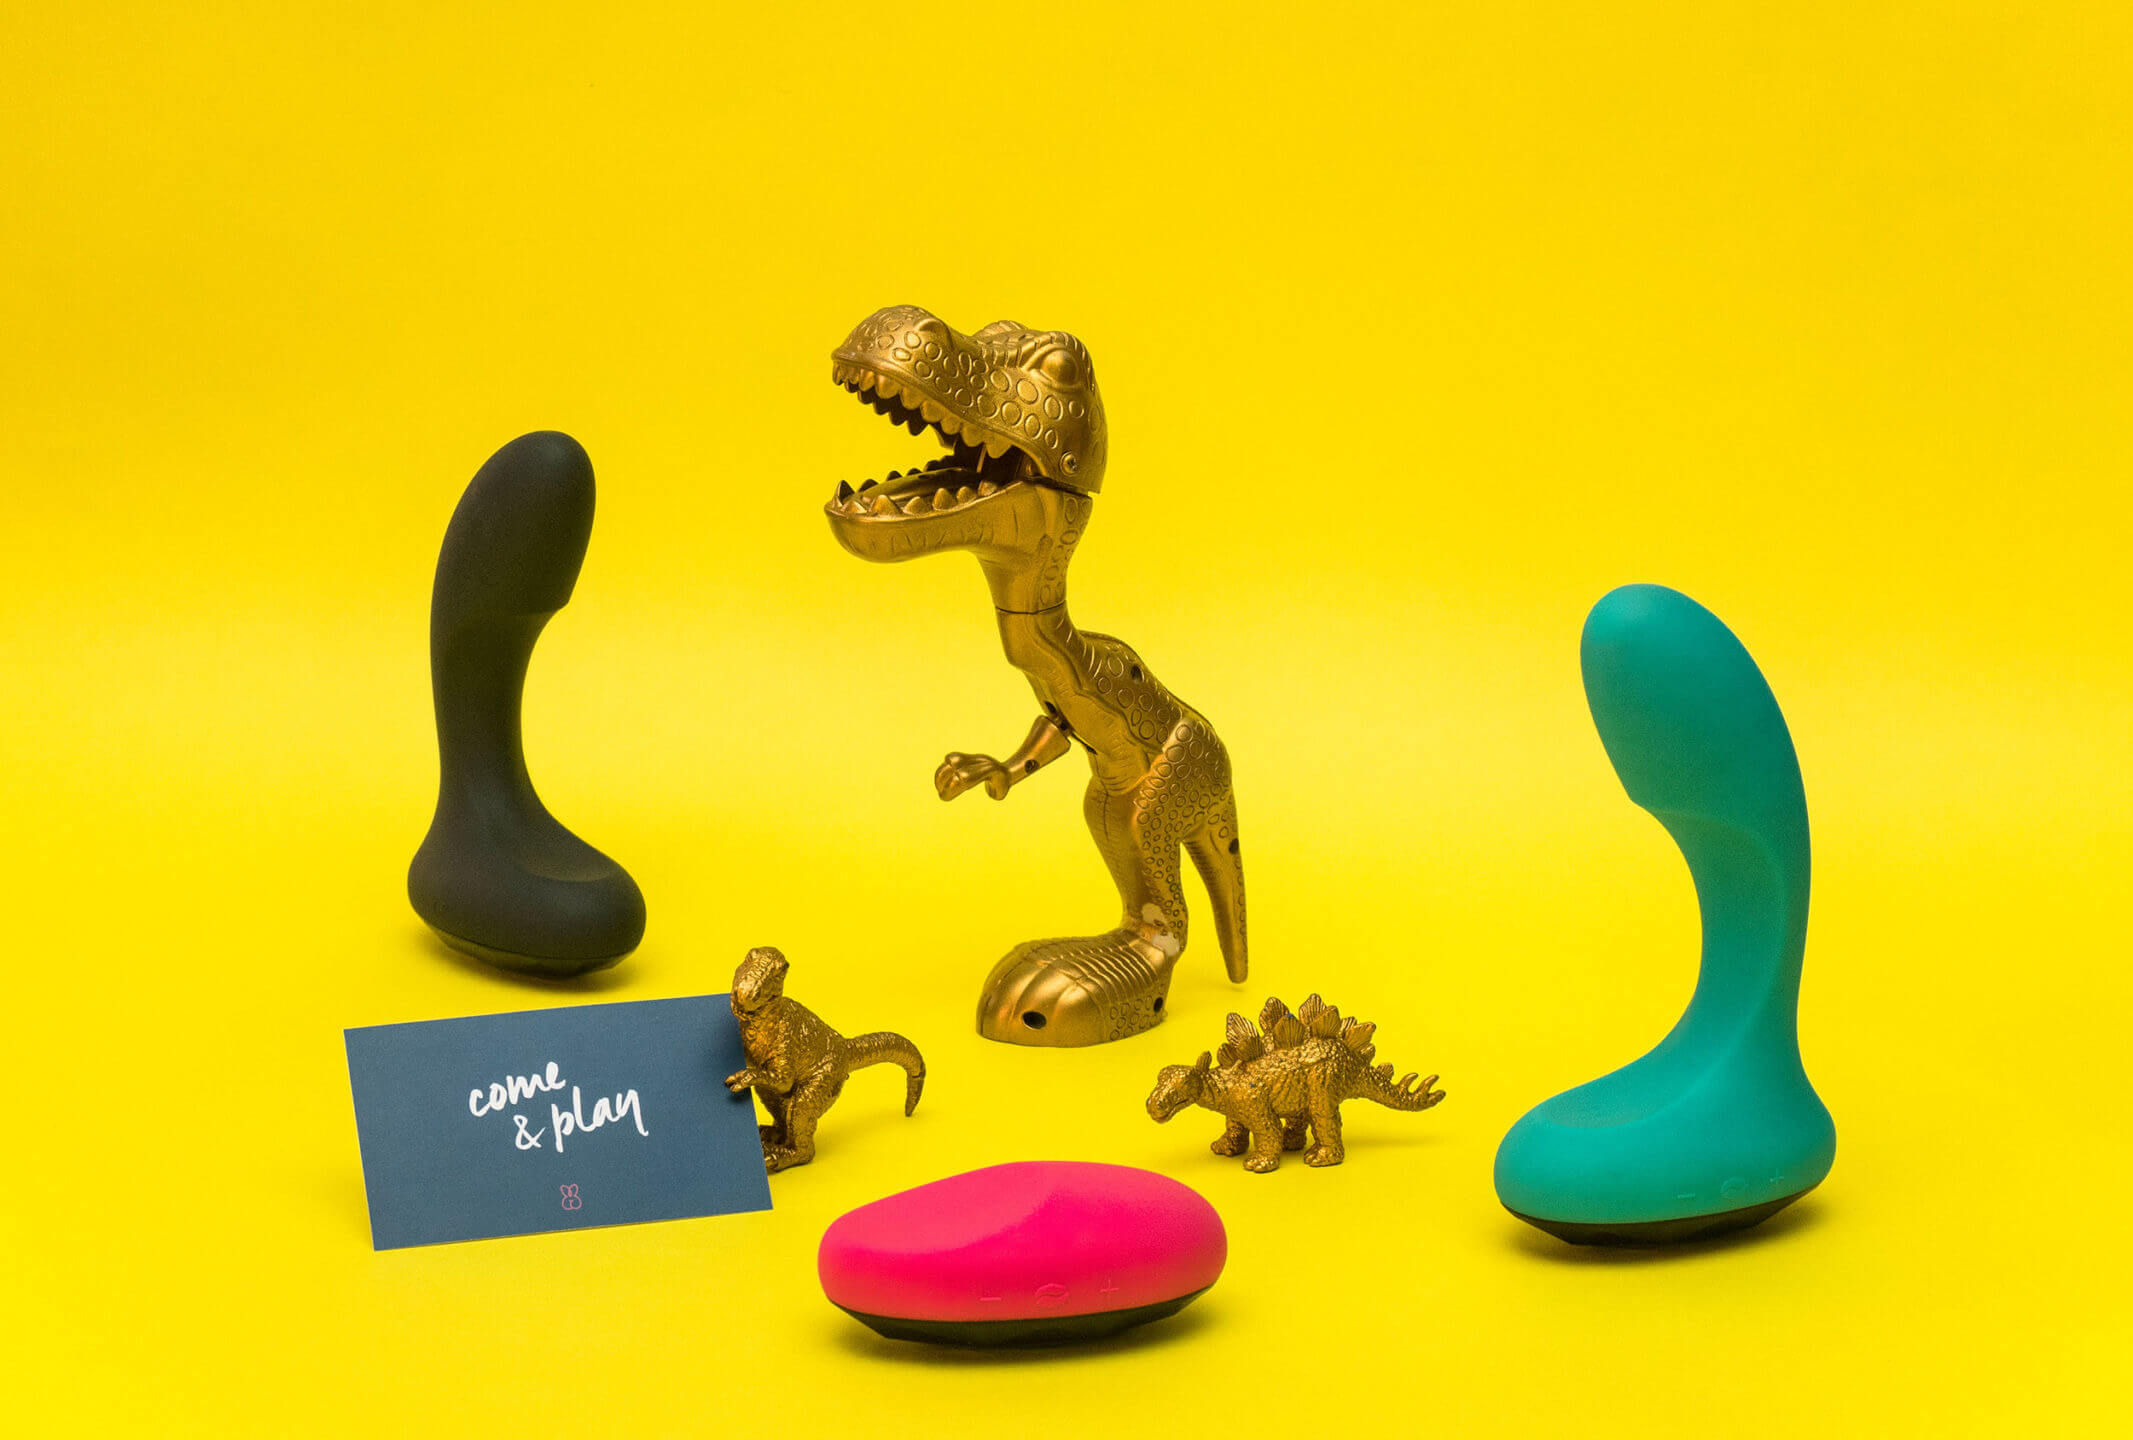 Dinosaurs and Vibrators. What?